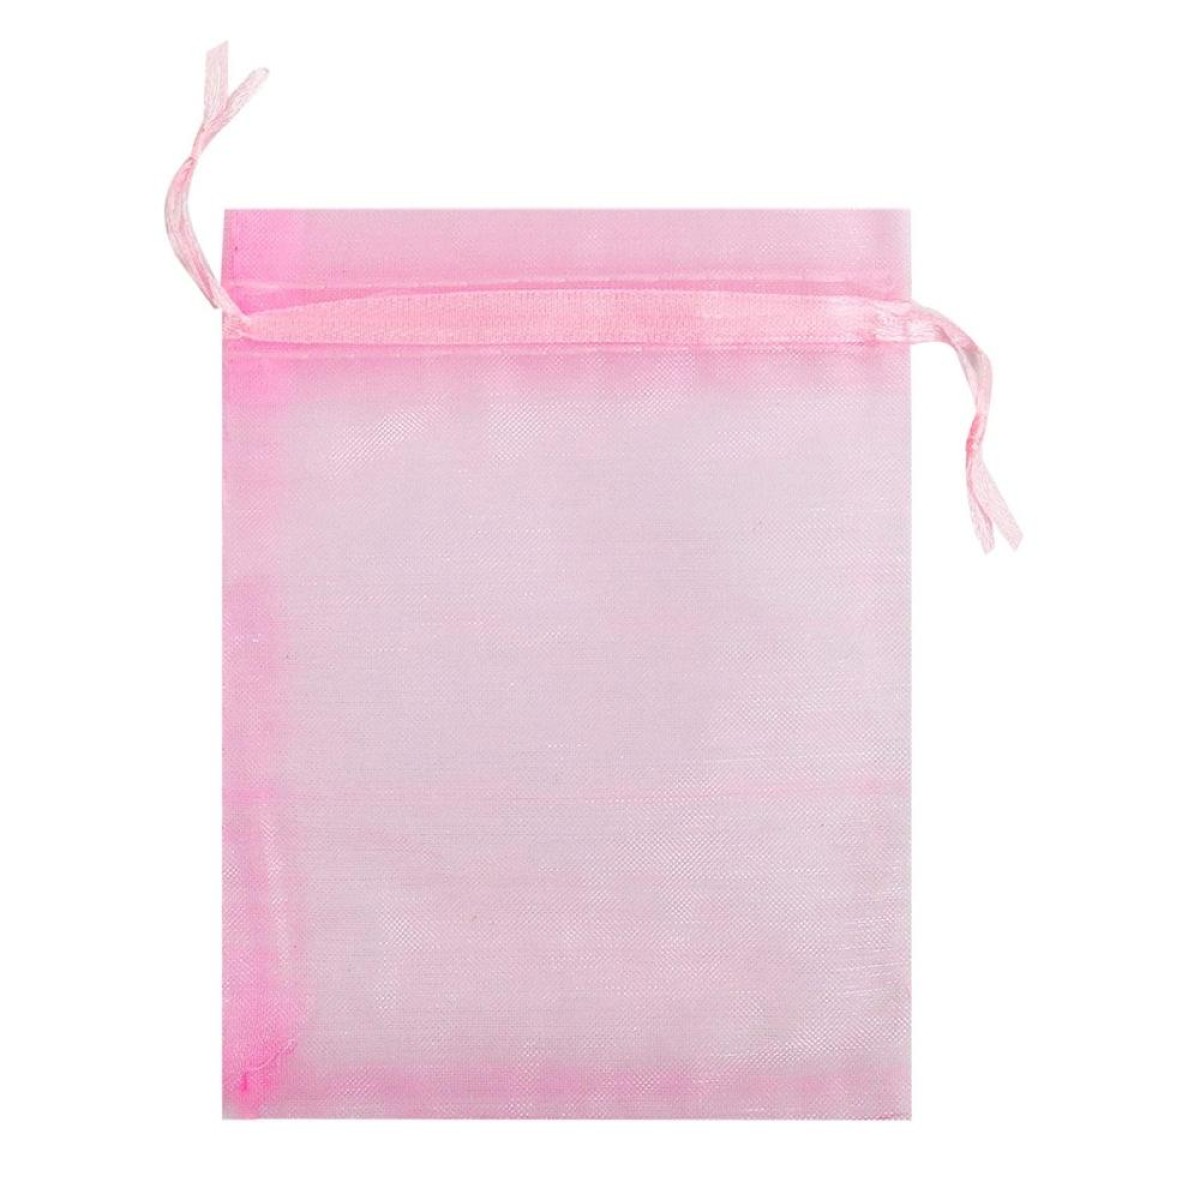 100pcs /Pack  Fruit Protection Bag Anti-Insect And Anti-Bird Net Bag 30 x 40cm(Pink)